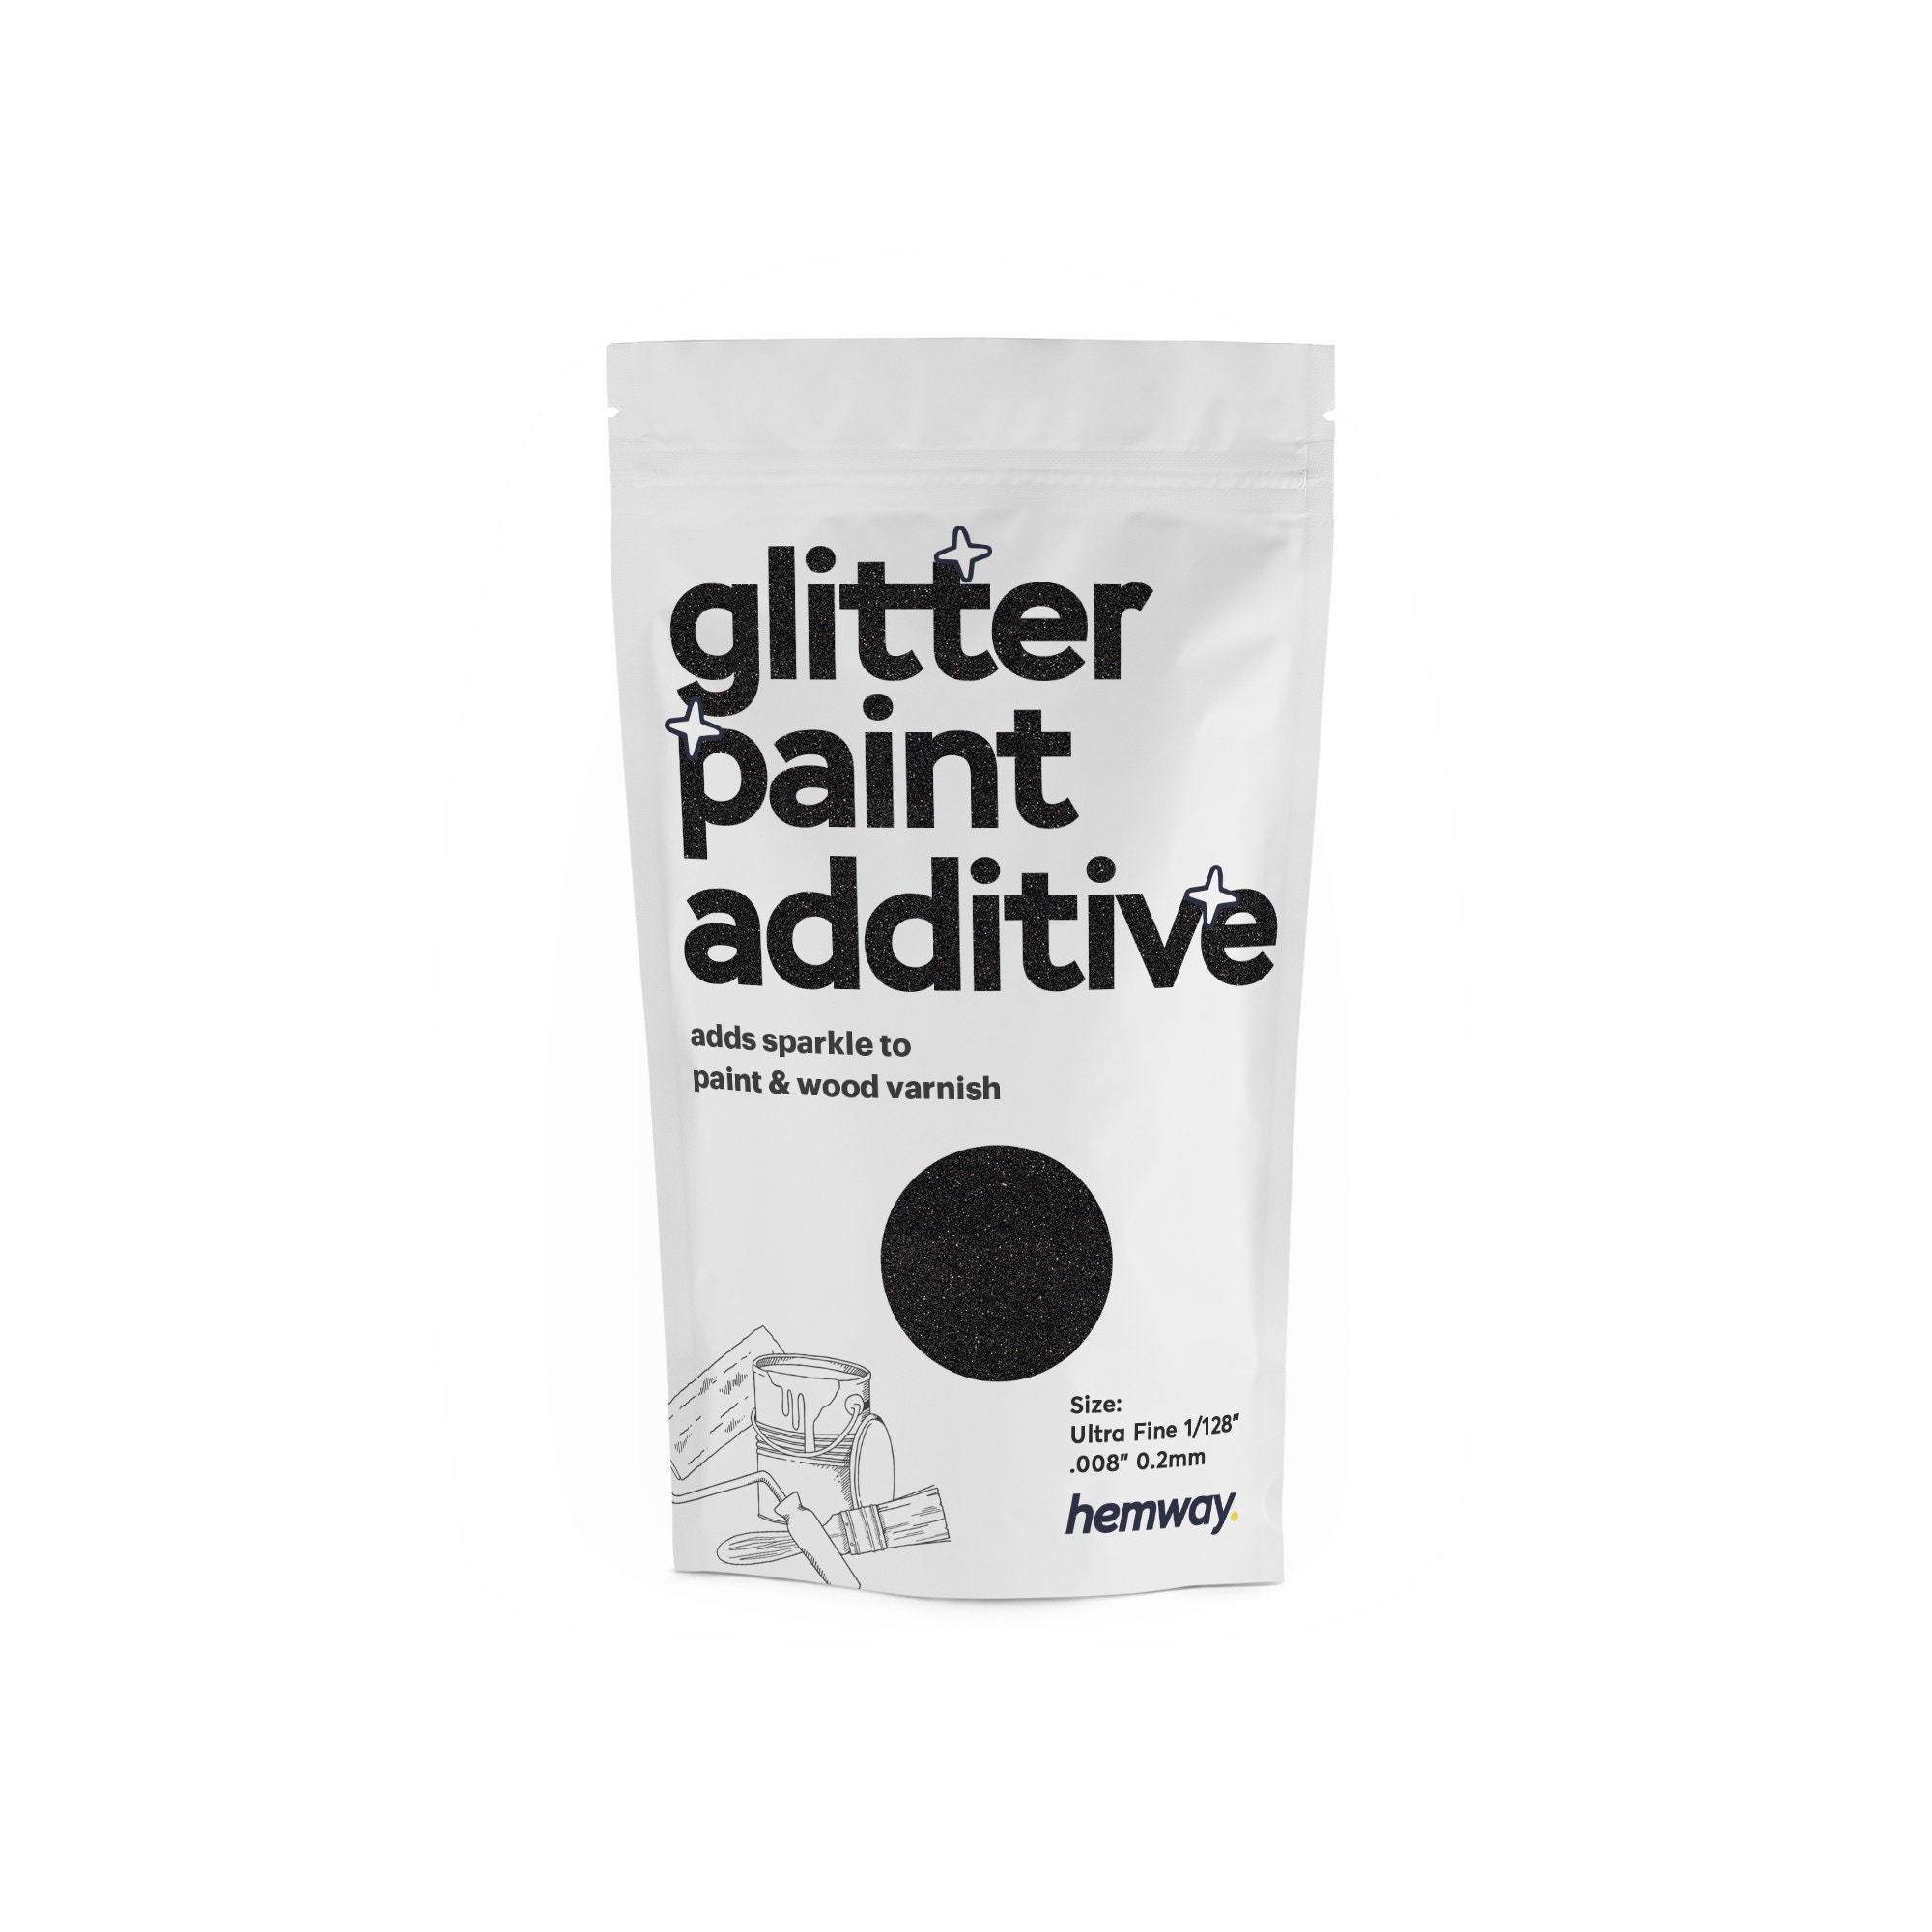 150g/5.3oz Wellmade Glitter Paint Additive for Wall Paint-Interior